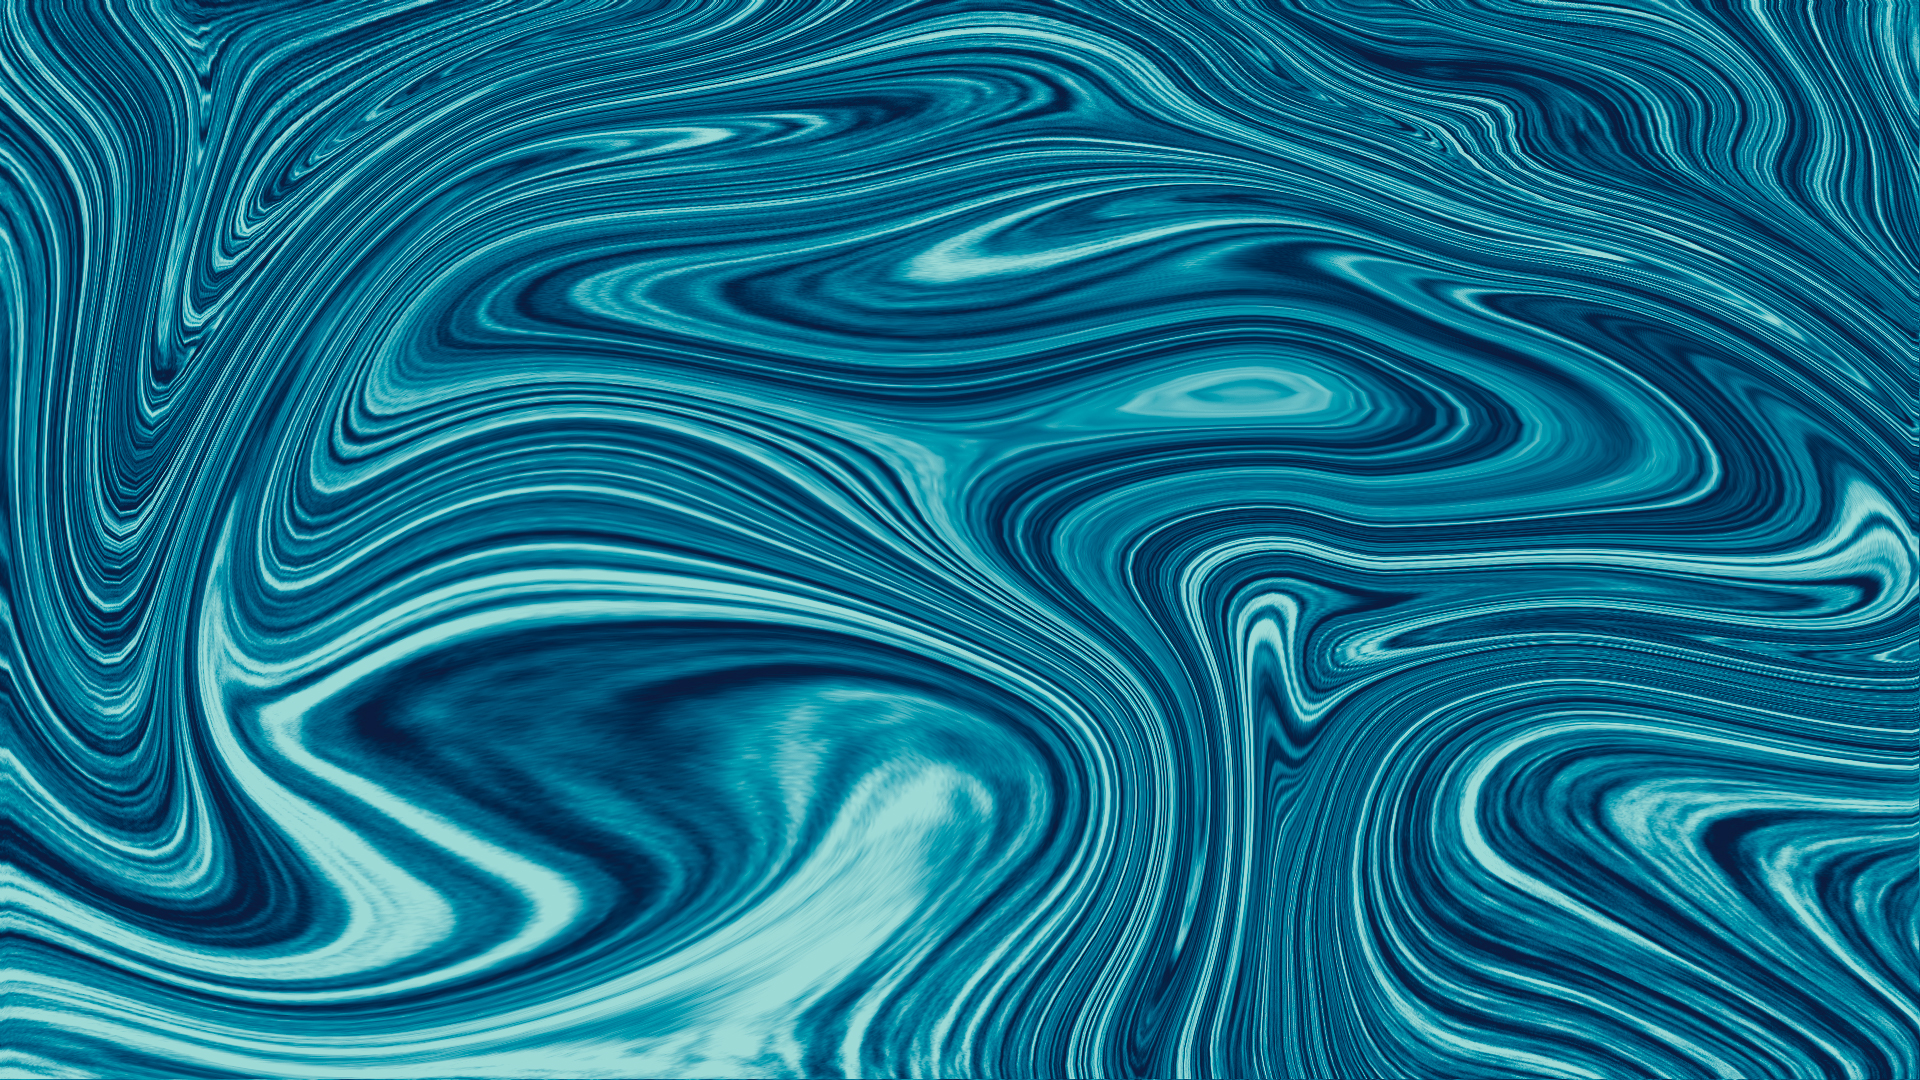 General 1920x1080 Marmor blue abstract